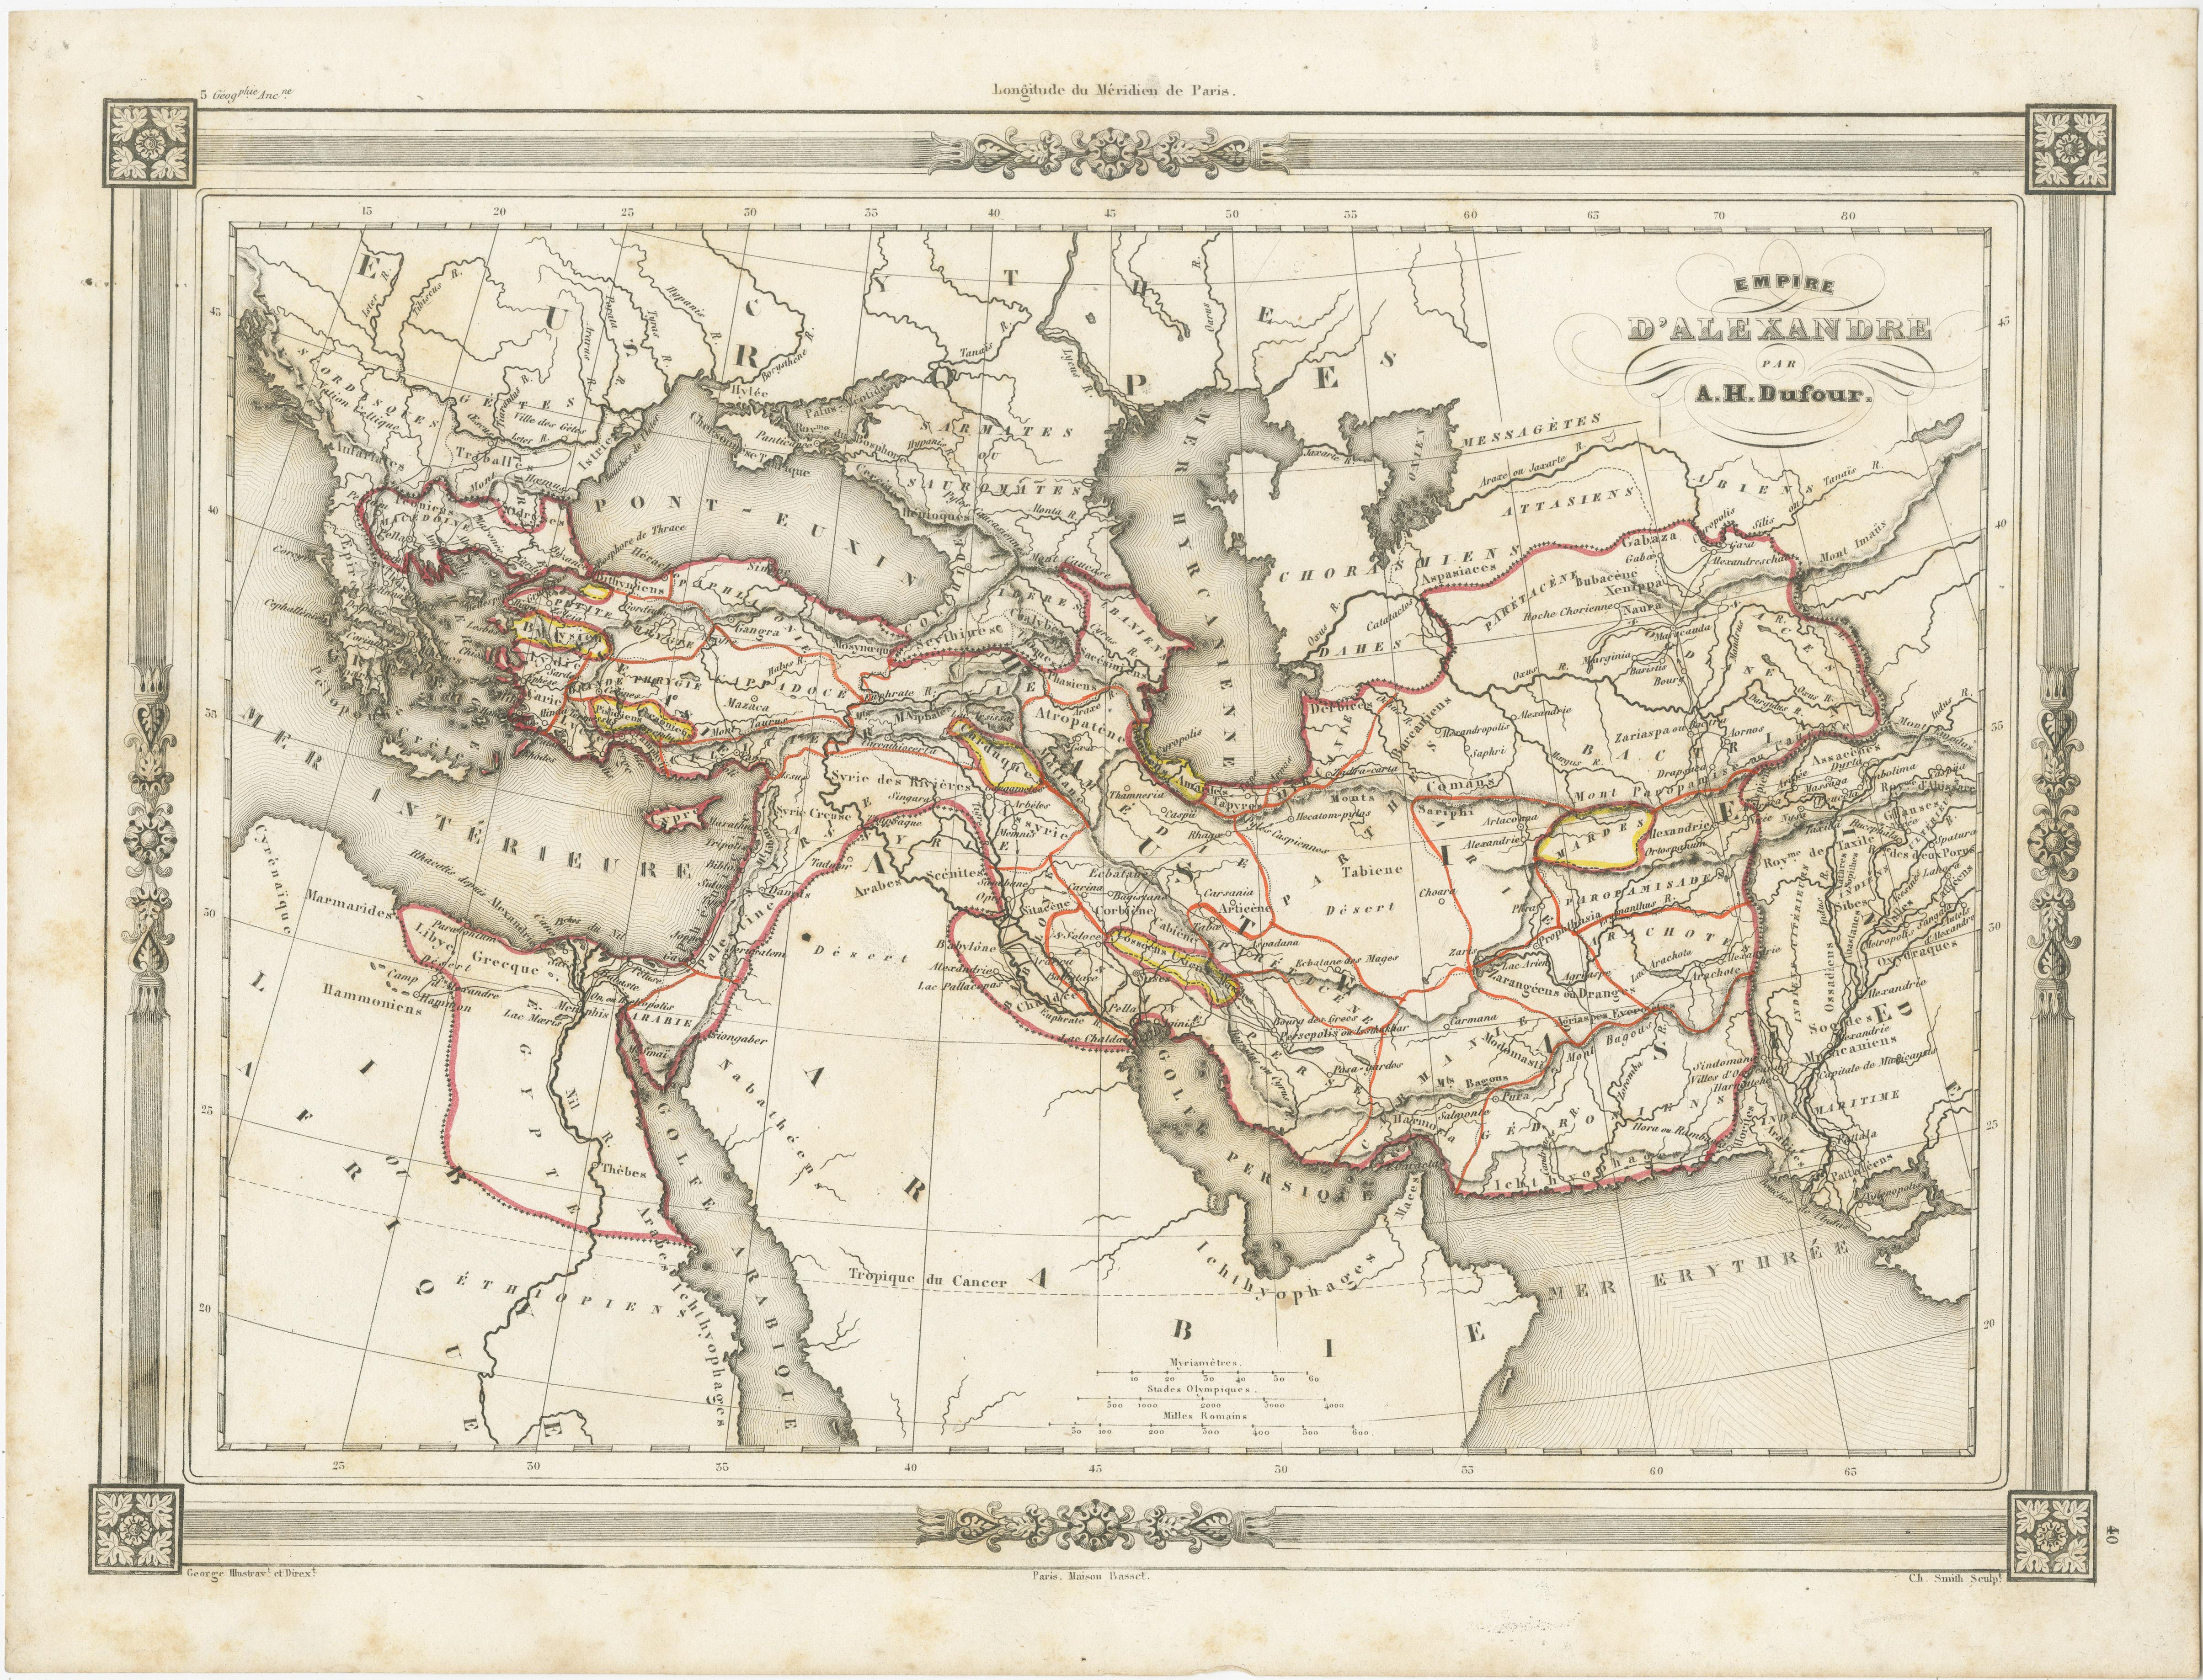 Antique map titled 'Empire d'Alexandre'. Attractive map of the Empire of Alexander the Great. The map covers from Alexander's homeland in Macedonia eastwards past Asia Minor and Persia as far as India and south to include Egypt. The Caspian Sea and